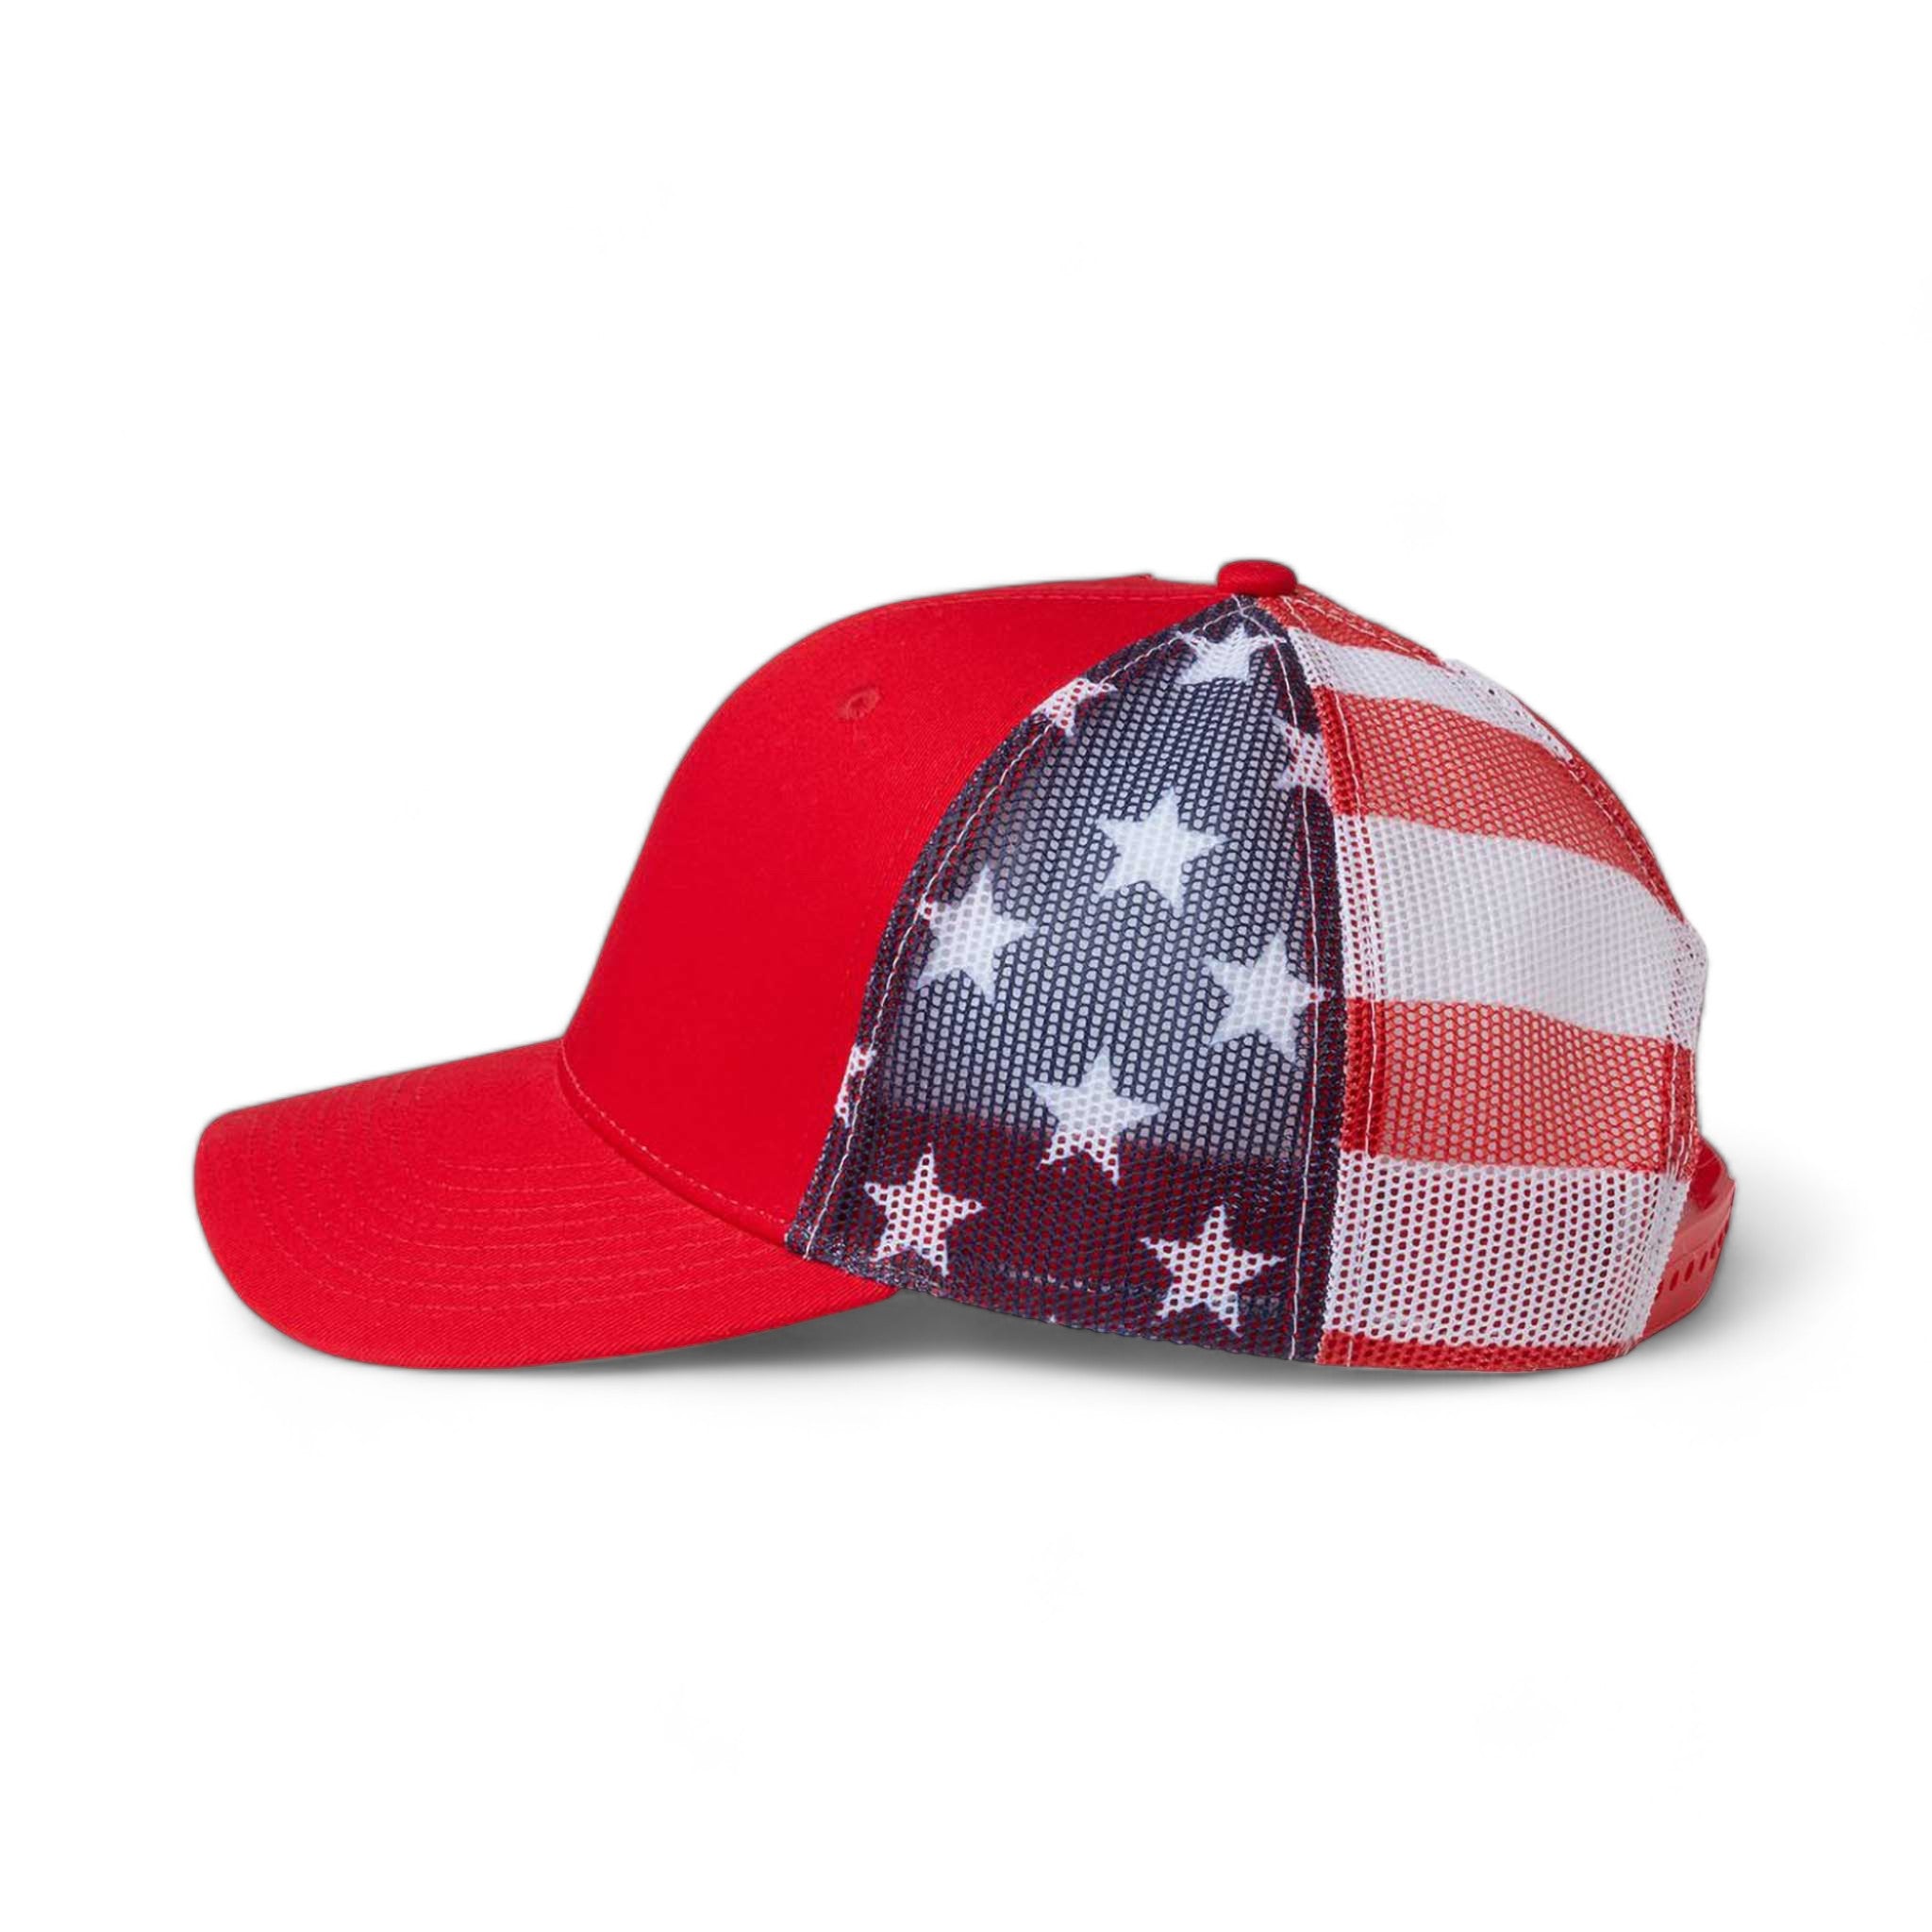 Side view of Kati S700M custom hat in red and usa flag